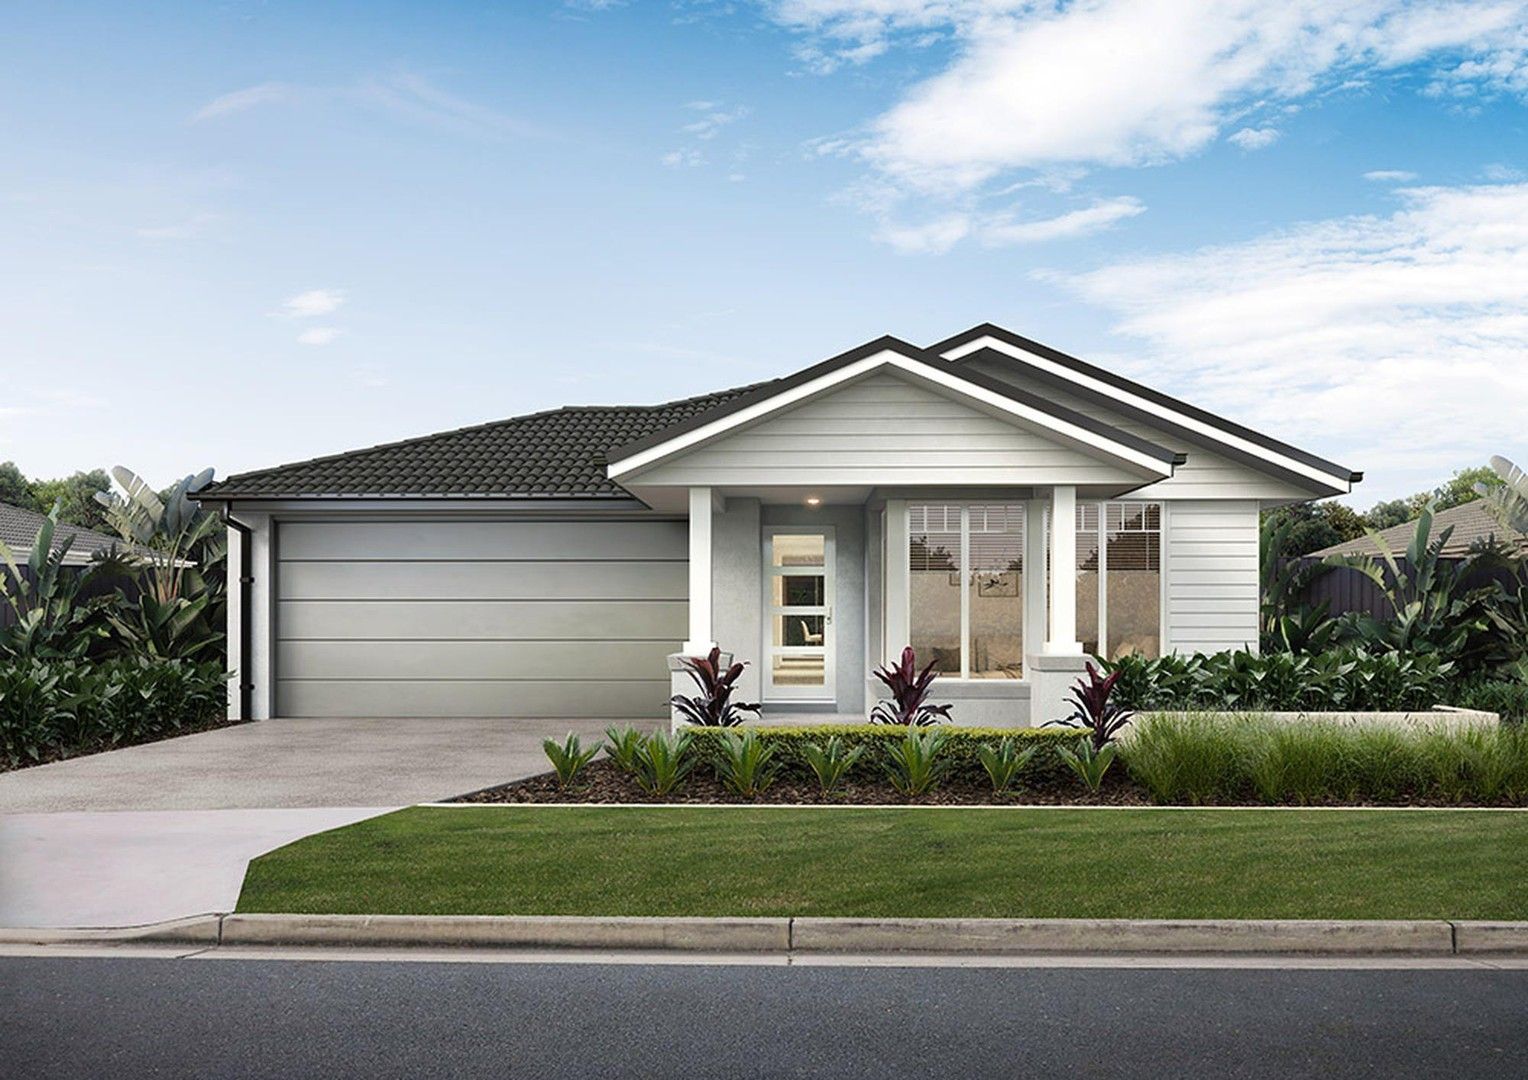 4 bedrooms New House & Land in 3628 Aspire Estate FRASER RISE VIC, 3336